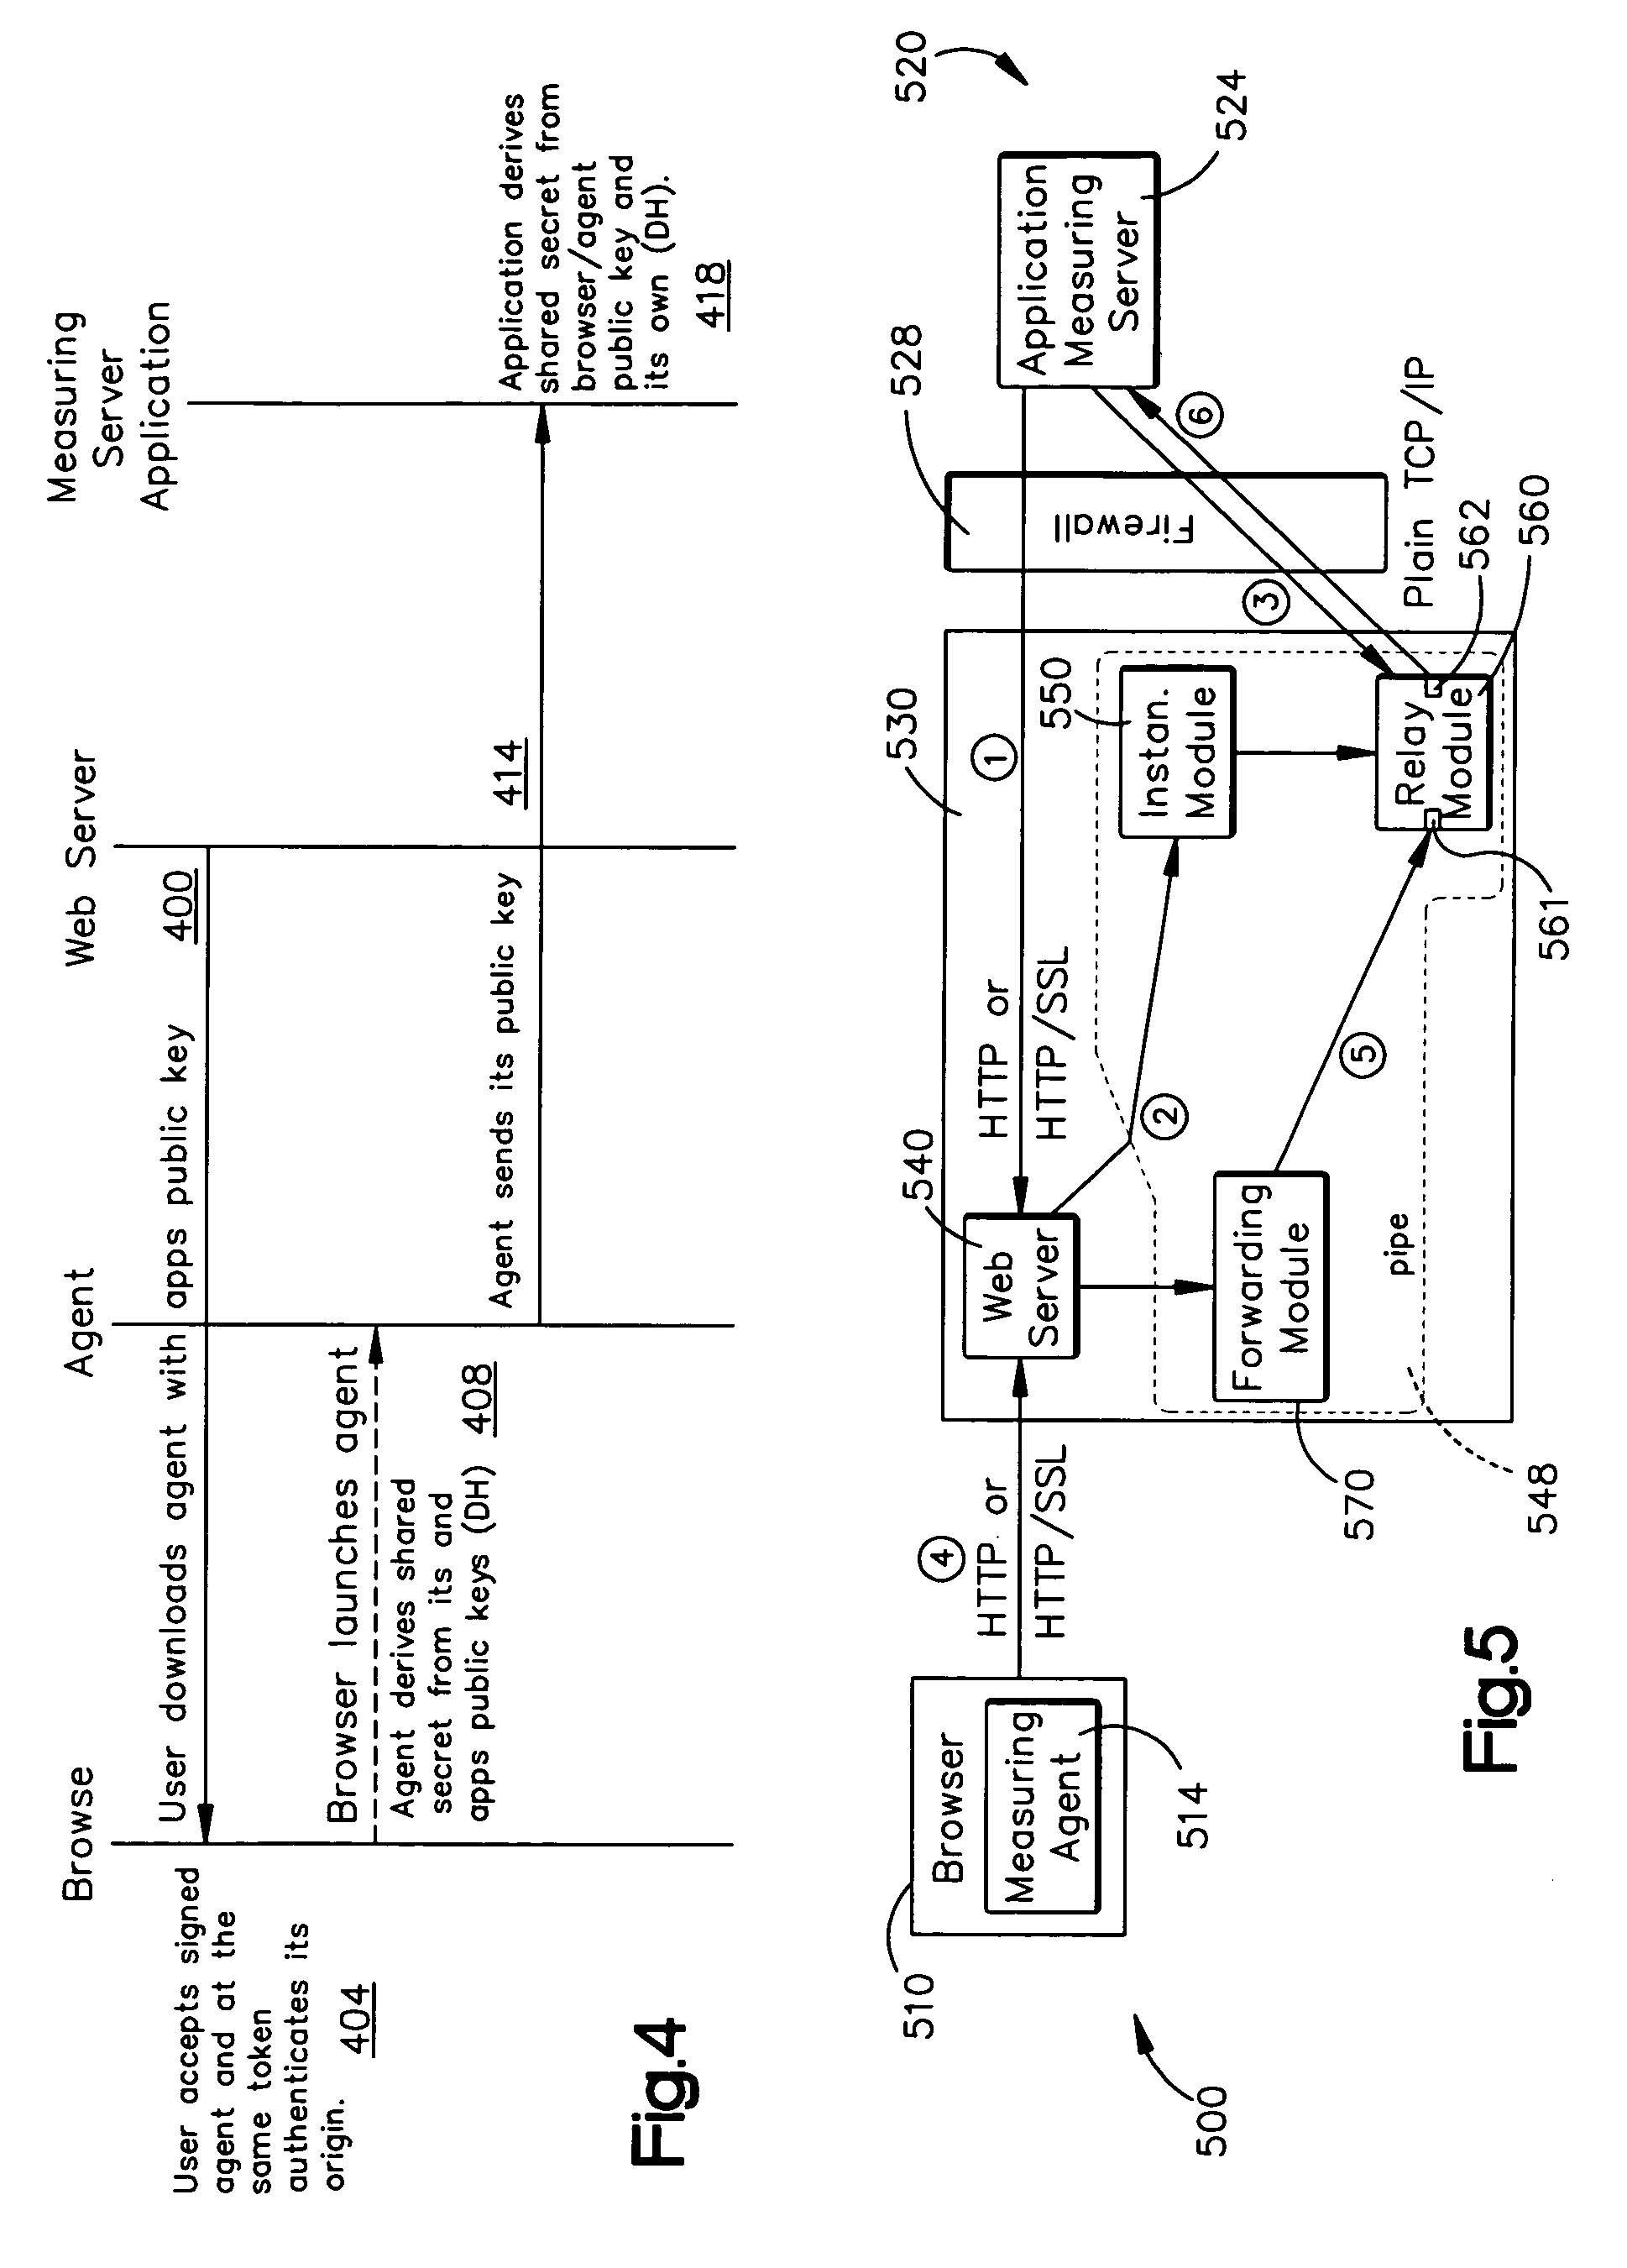 Secure data transfer method and system